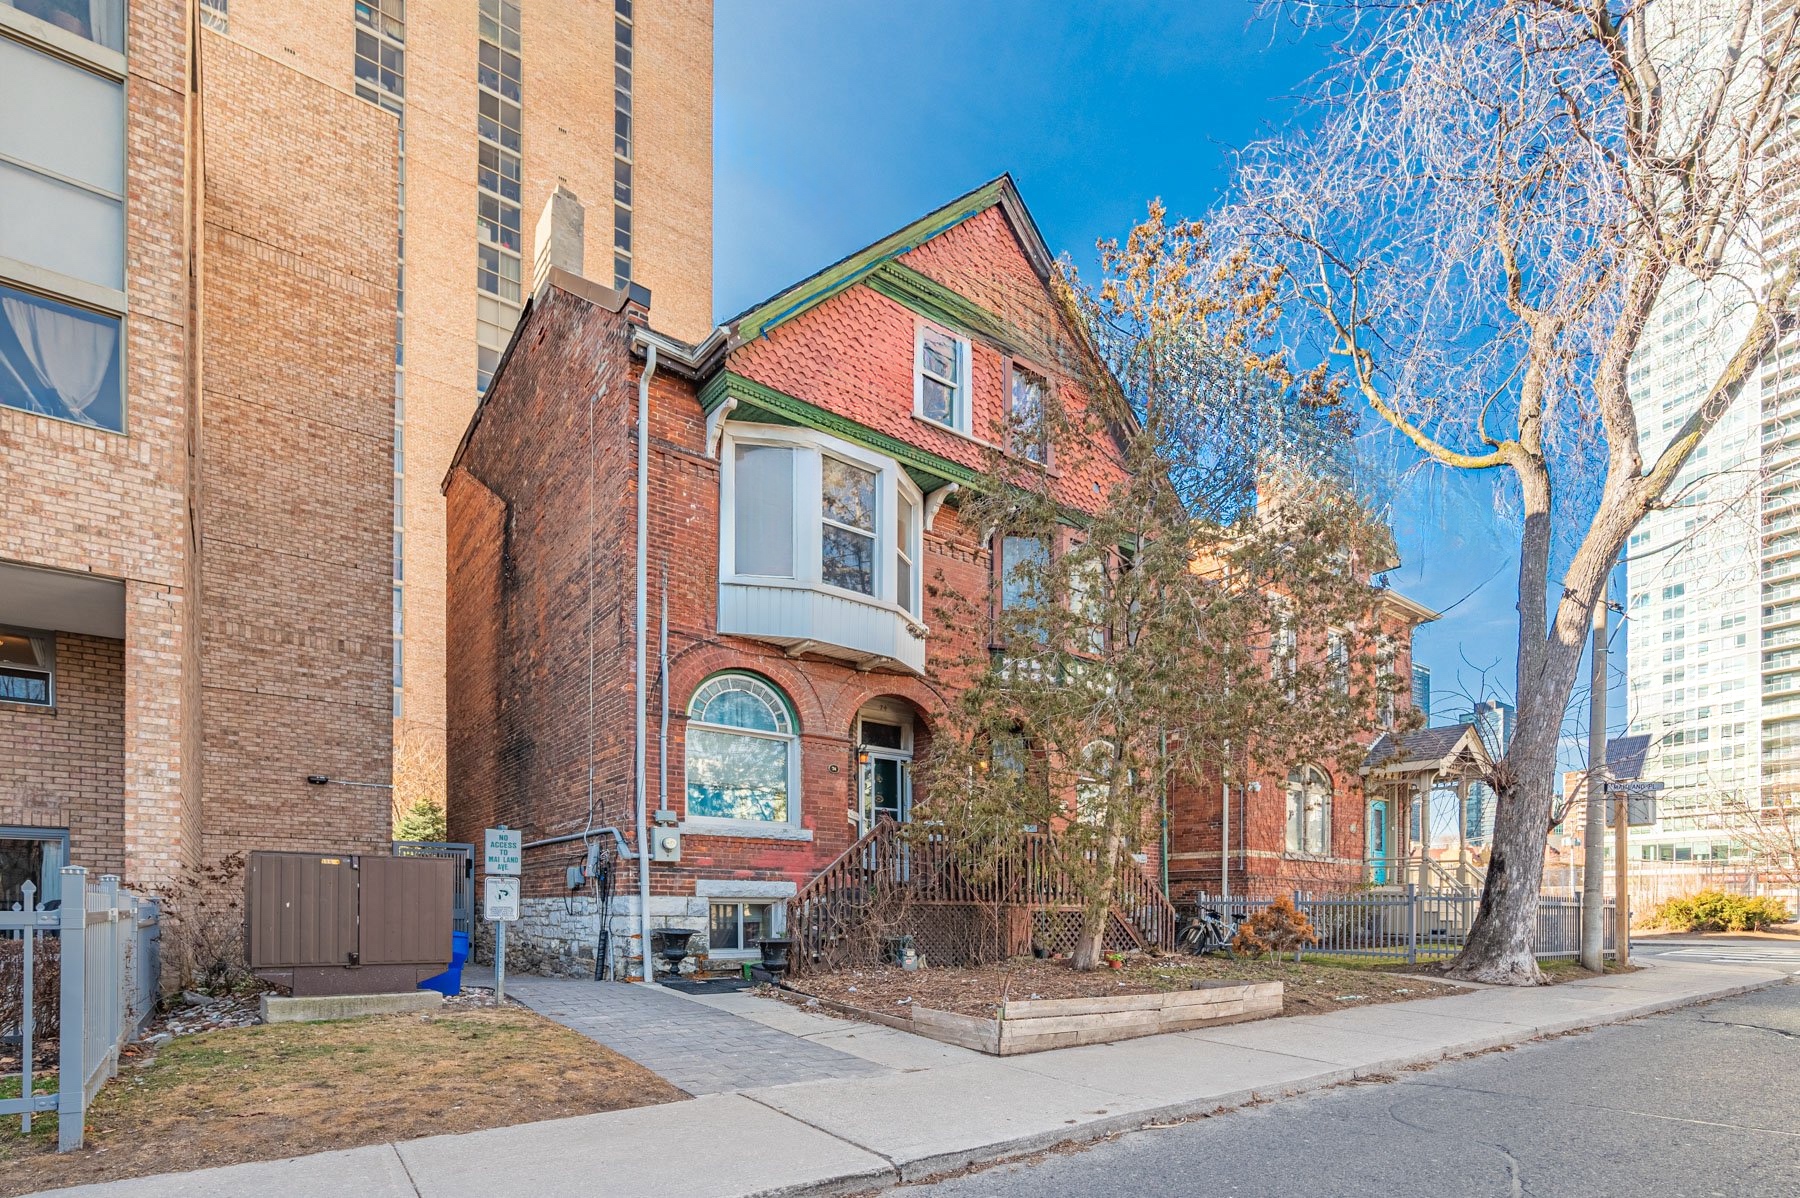 Front of 74 Homewood Ave, a 2-storey red-brick duplex.